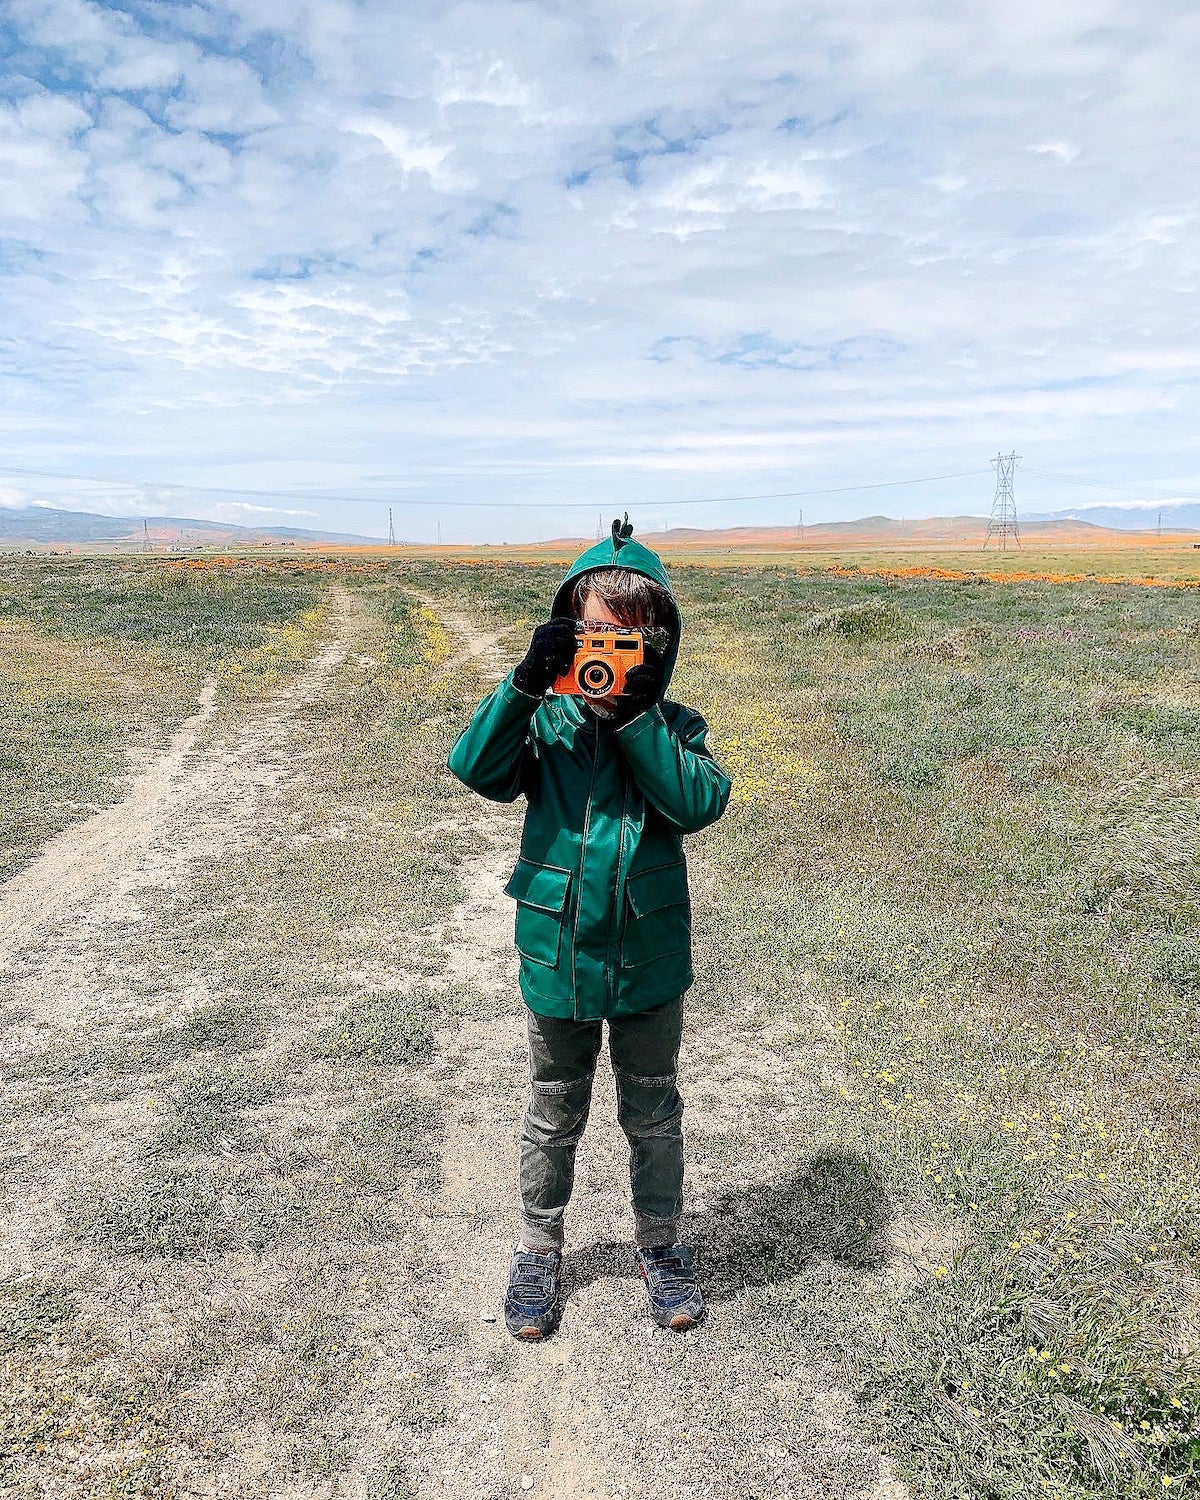 Child pointing camera at camera while standing in open pasture